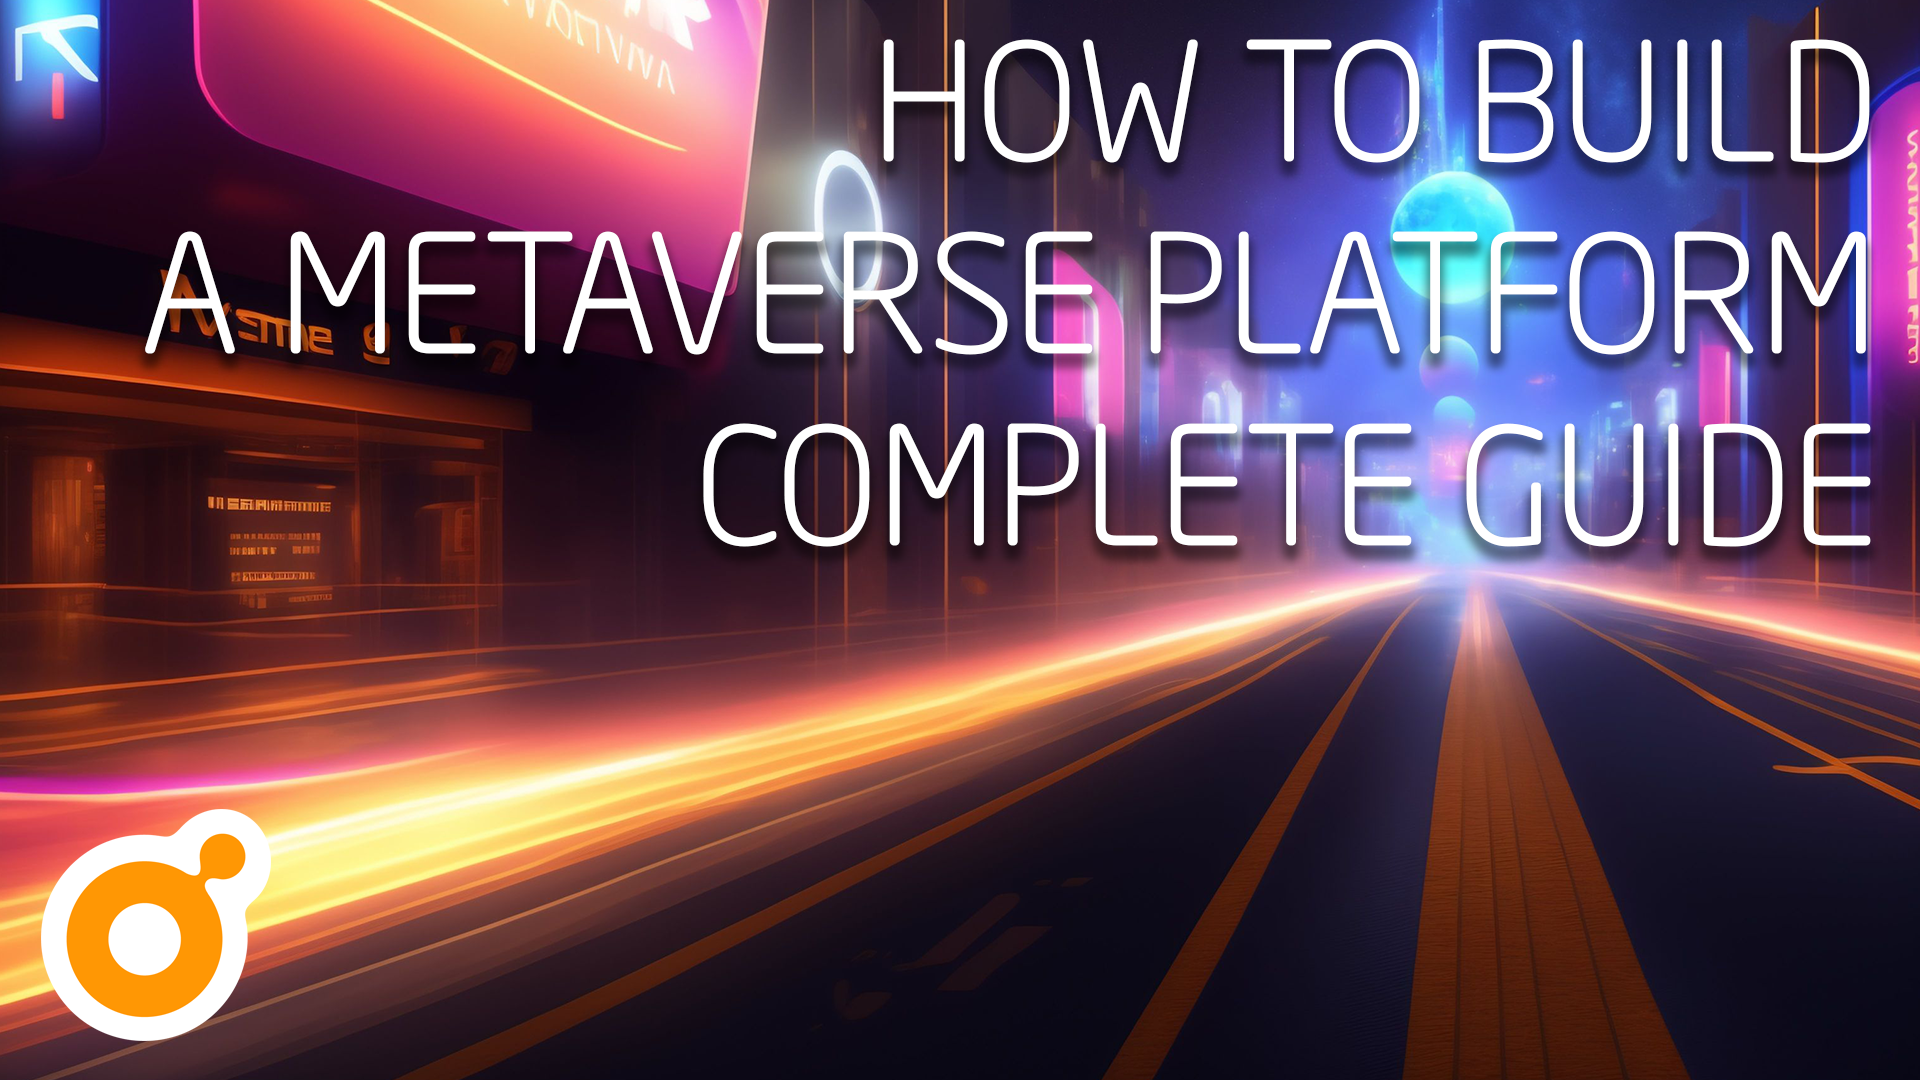 How to Build a Metaverse Platform: Complete Guide